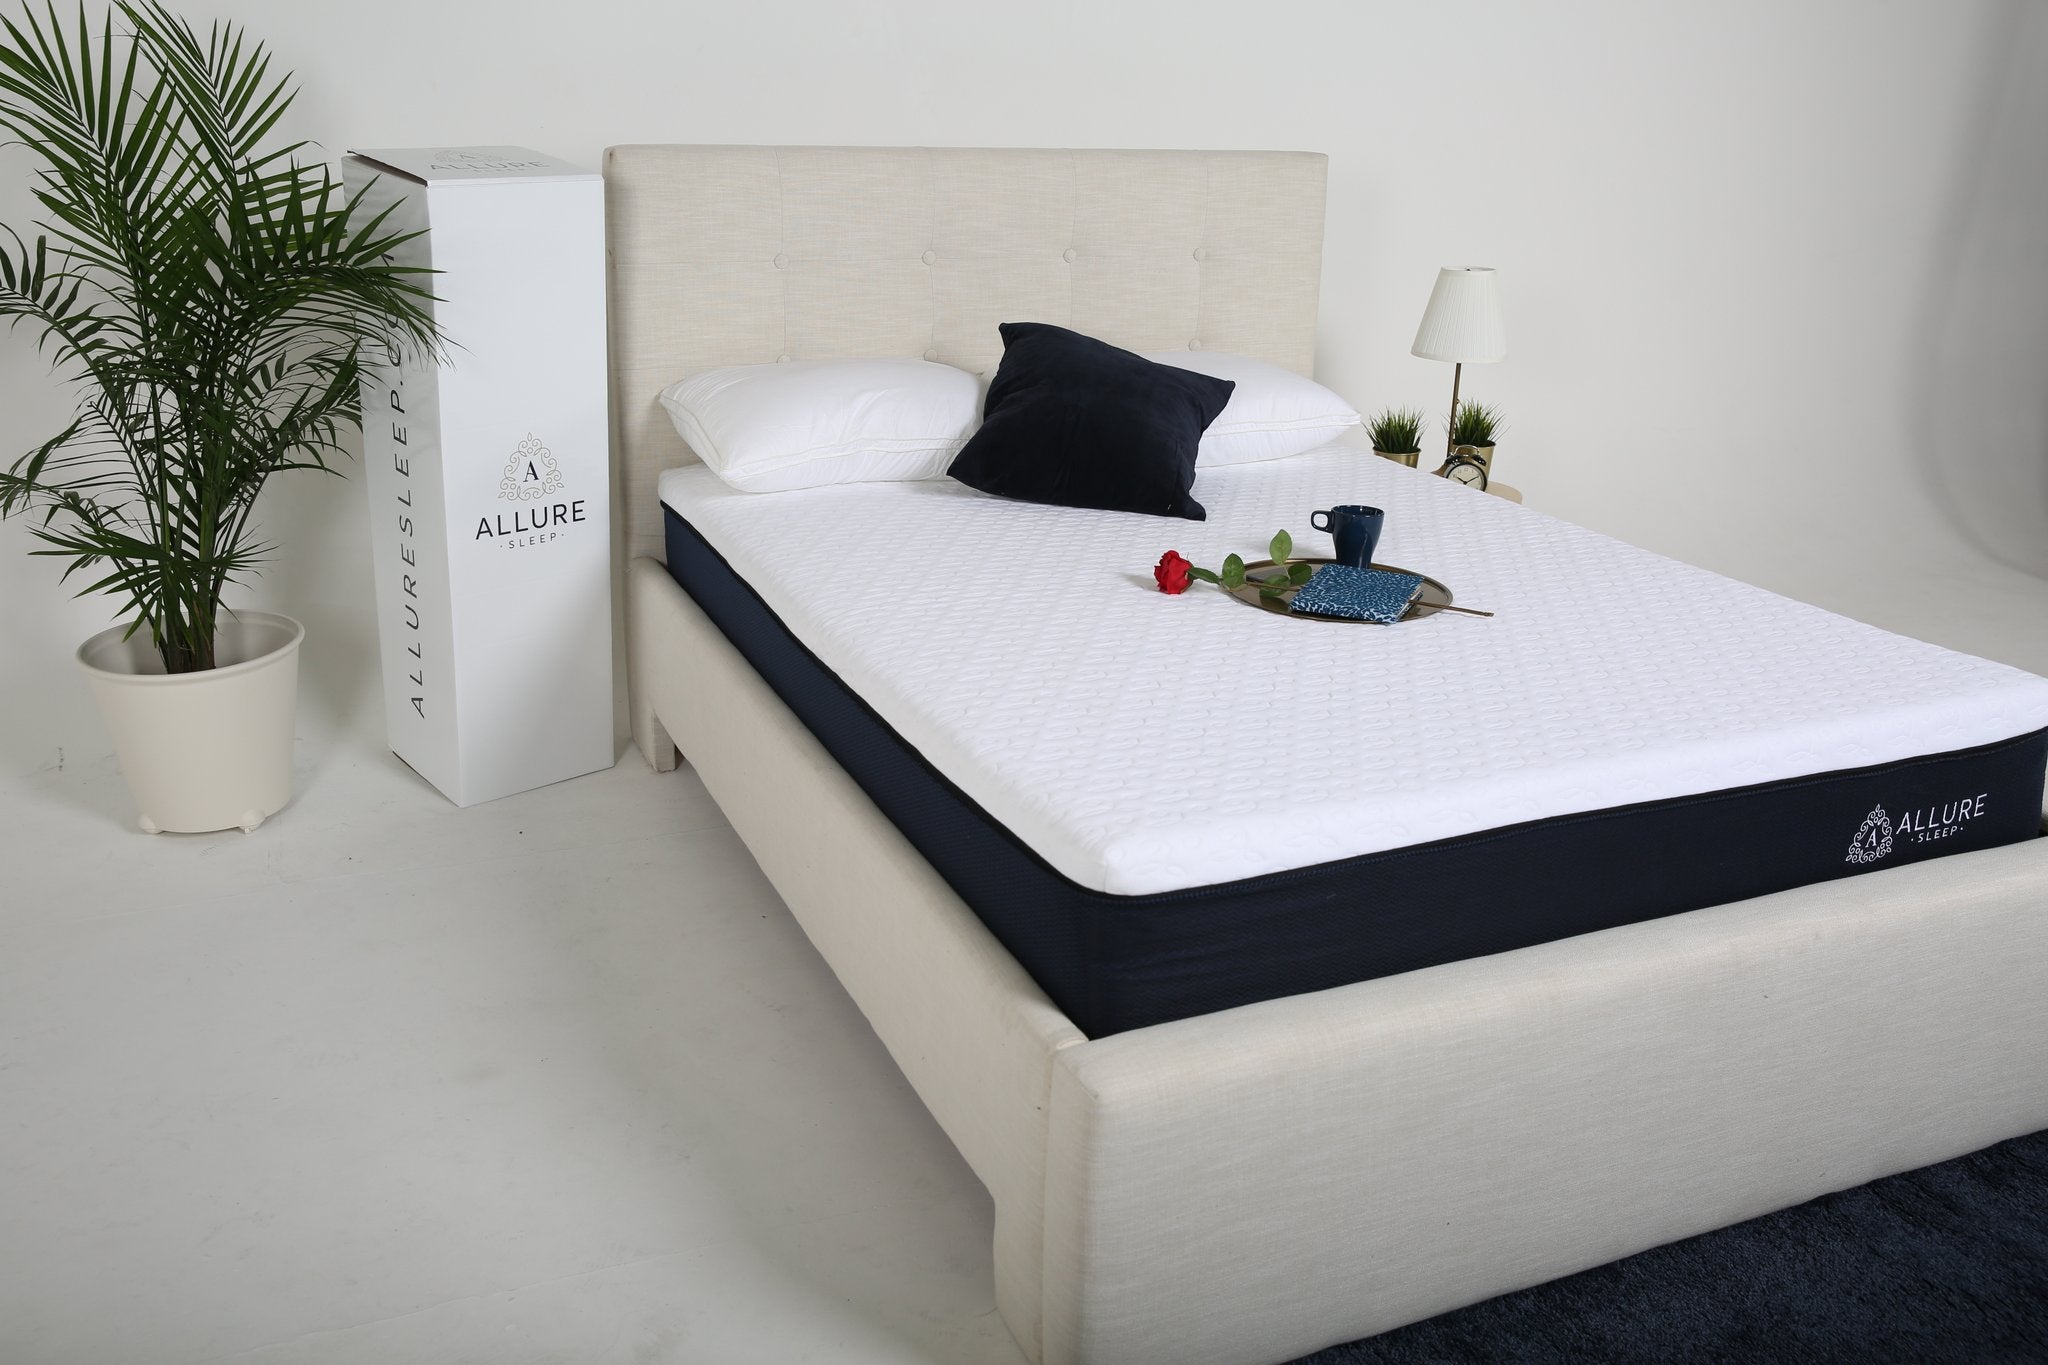 How to Unbox Your Allure Mattress